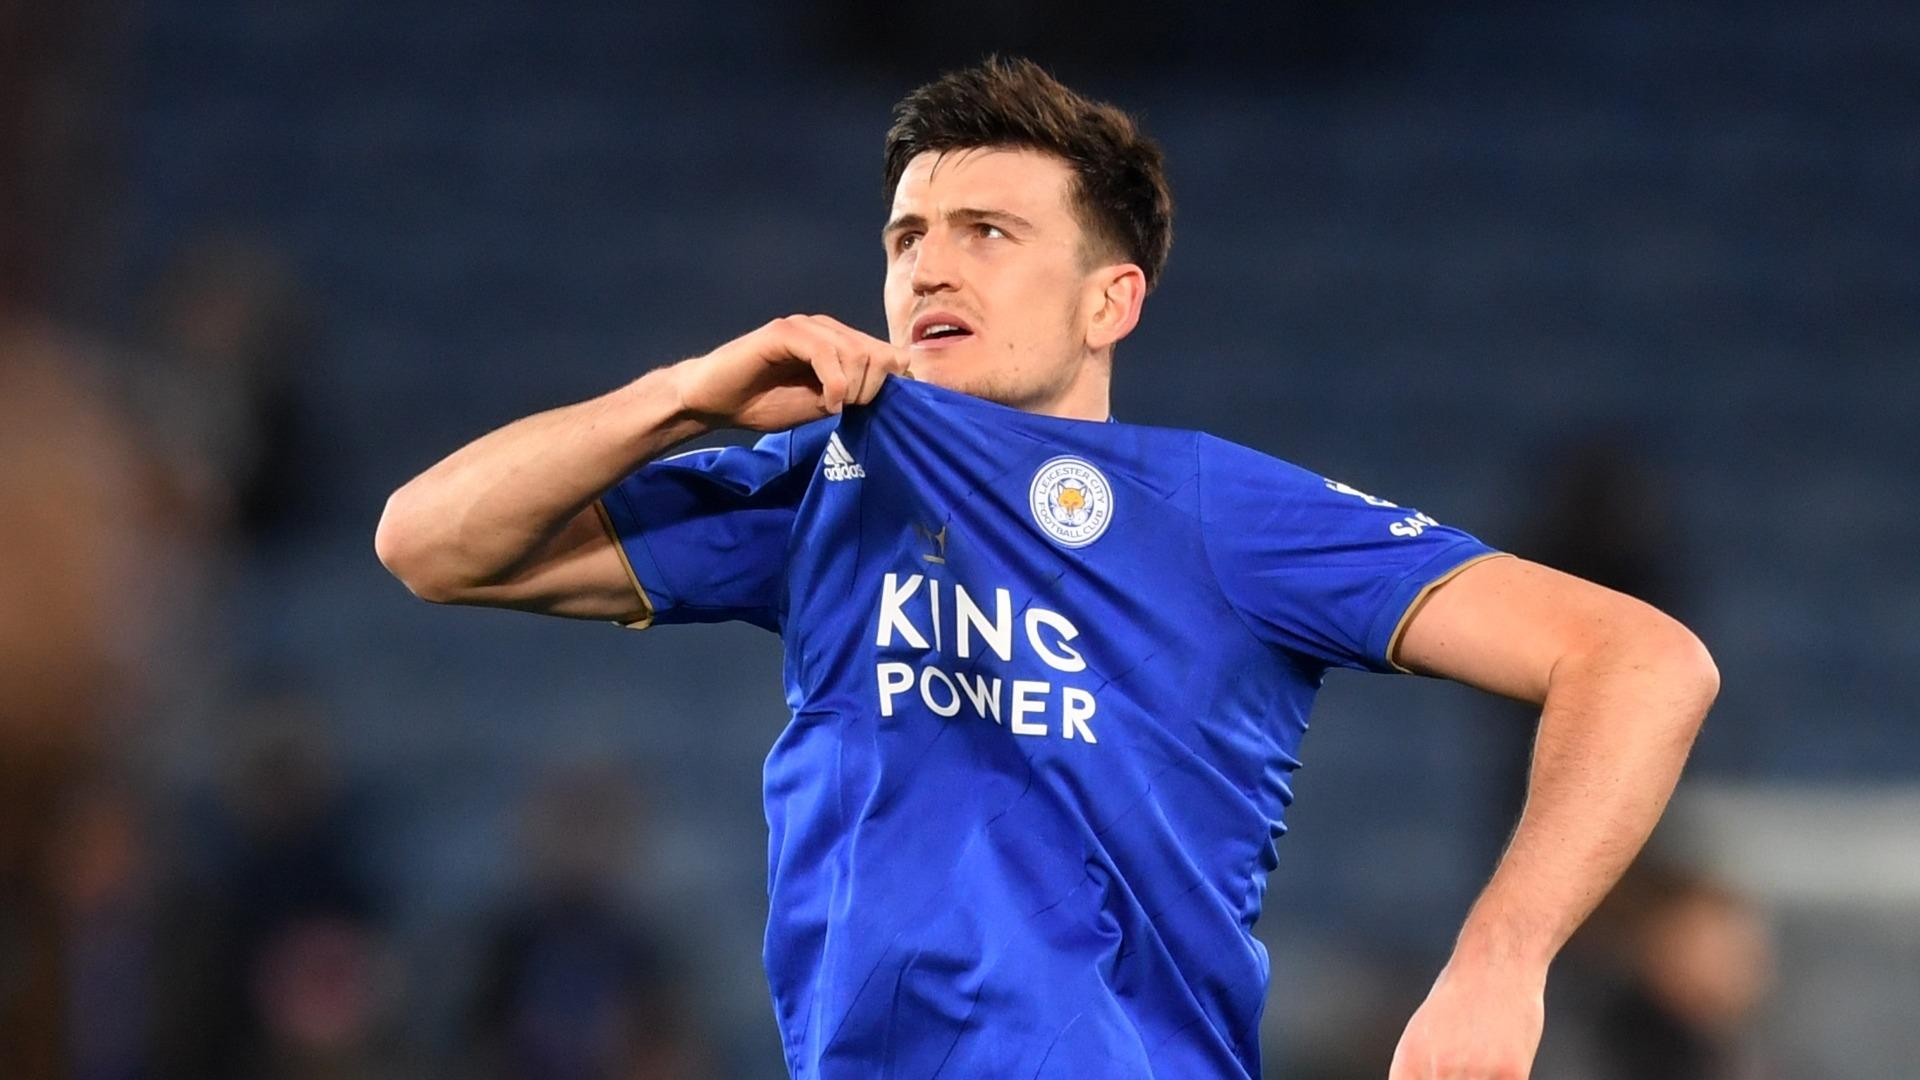 Wayne Rooney: Leicester City defender Harry Maguire would be a good